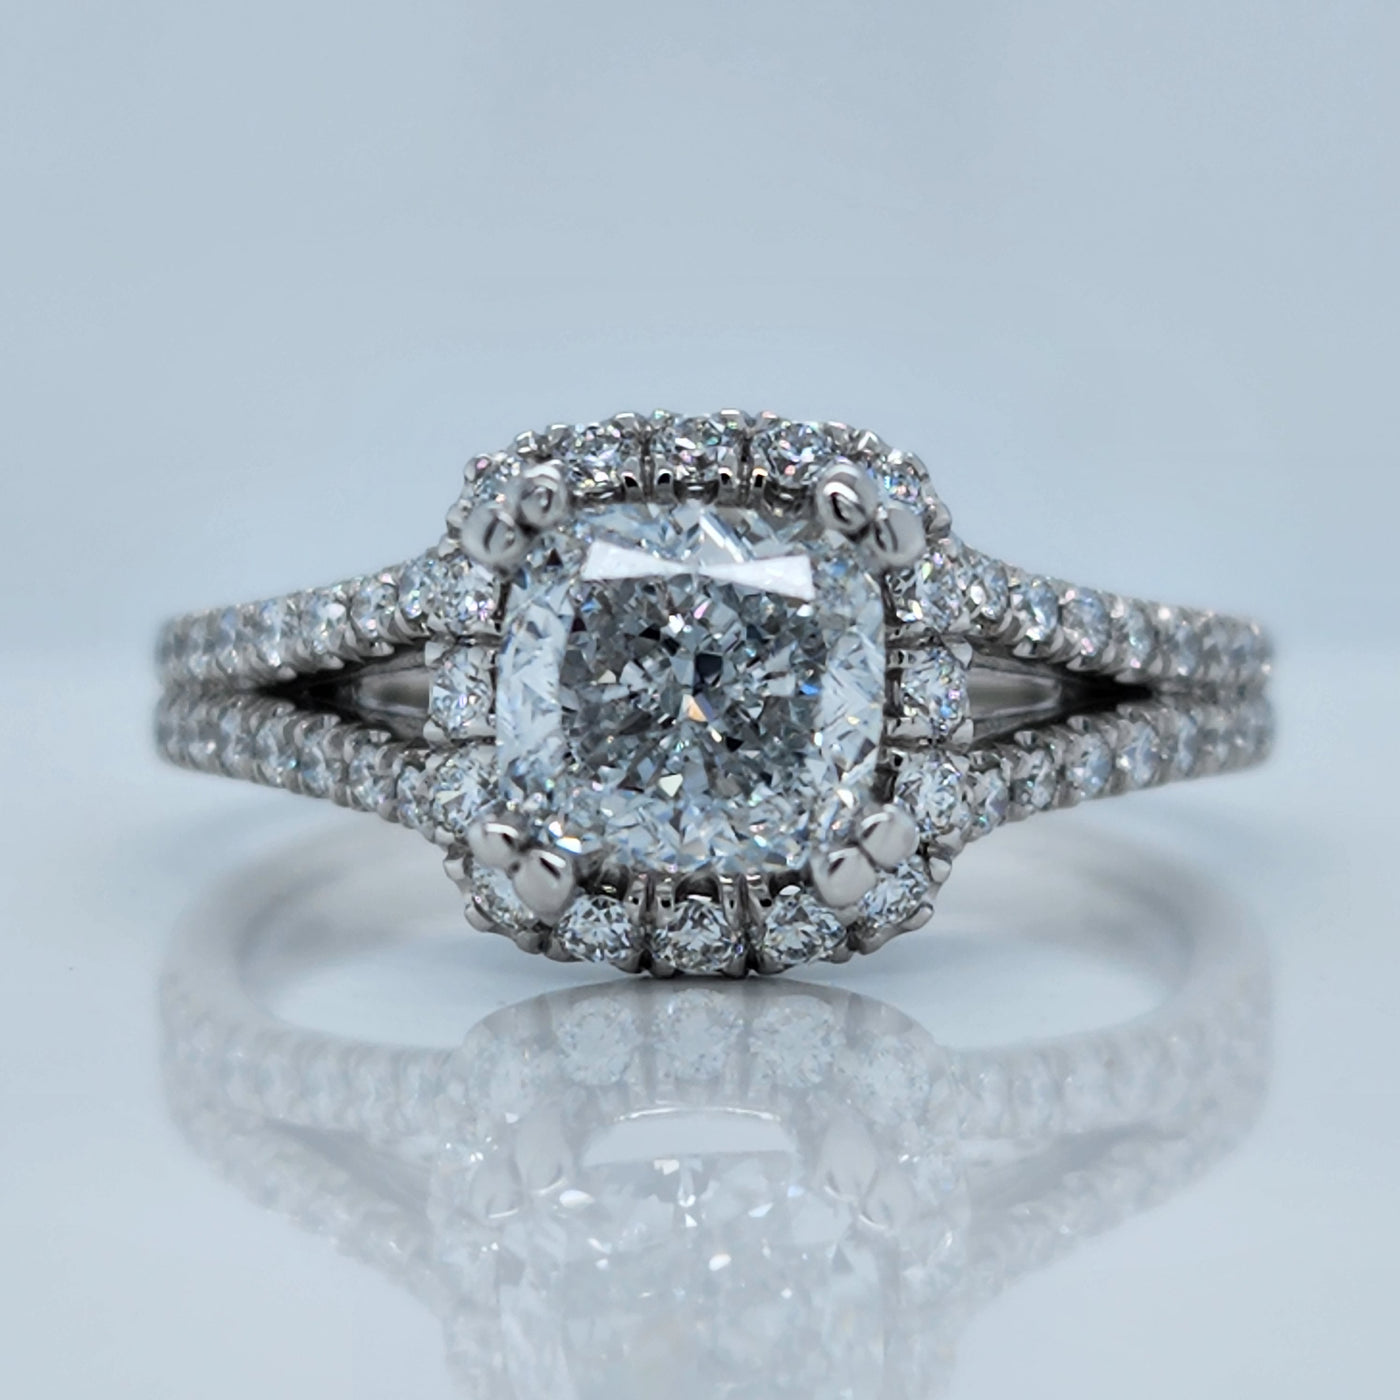 White Gold Engagement Ring With Cushion Cut Diamond and Round Accents